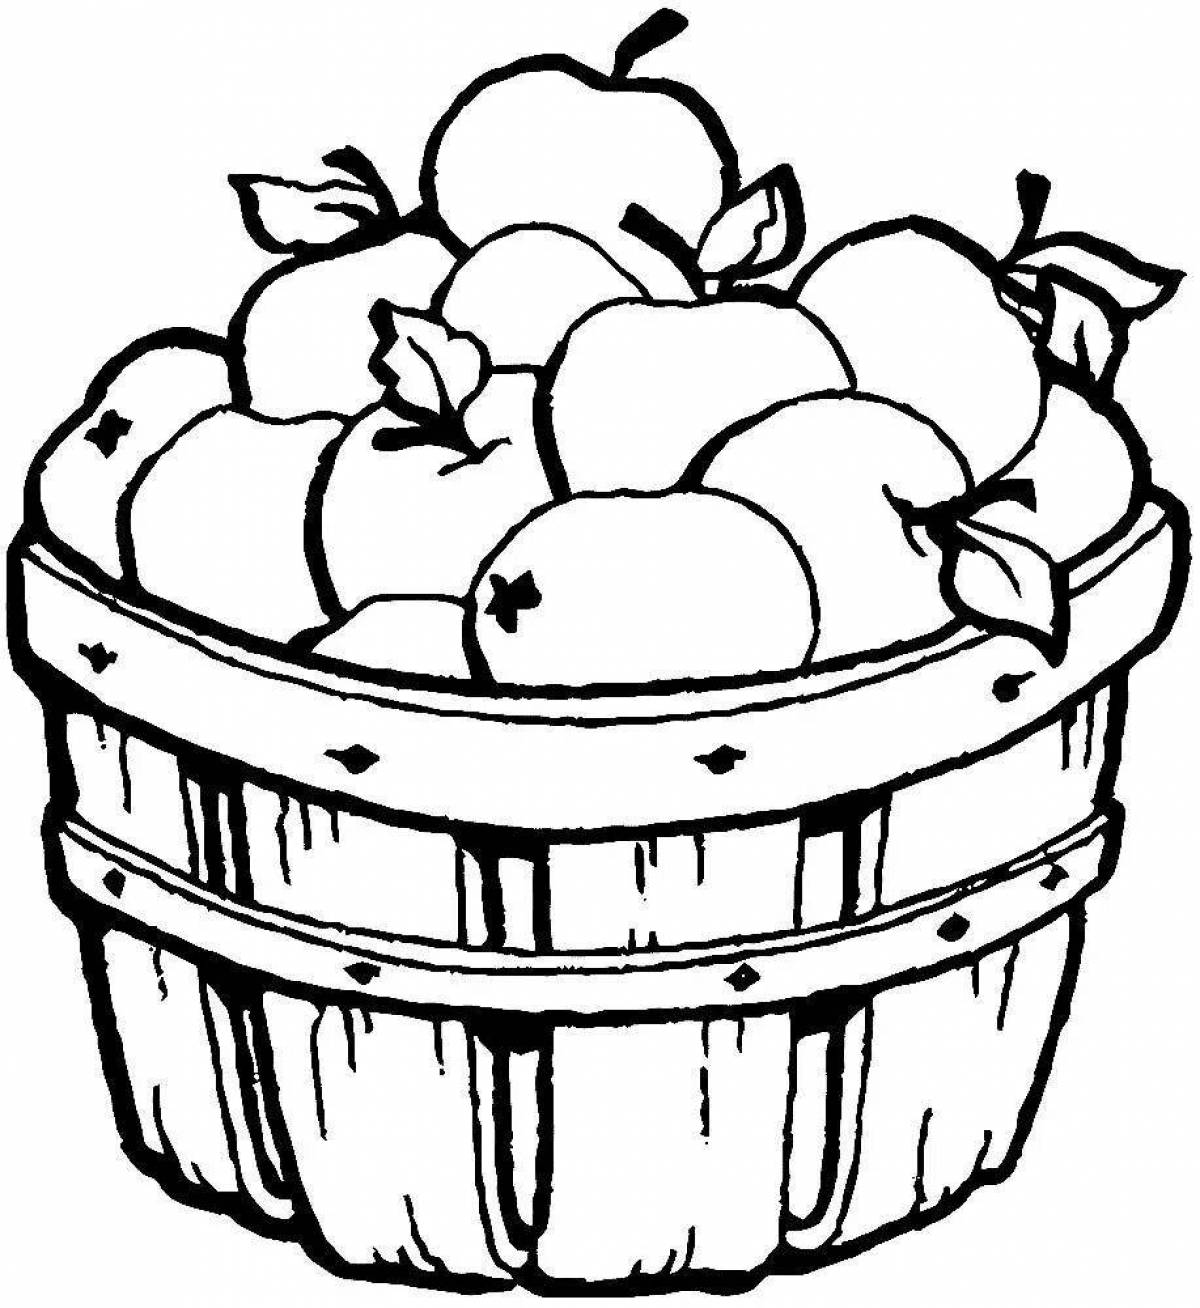 A bountiful harvest of fruits and vegetables in a basket